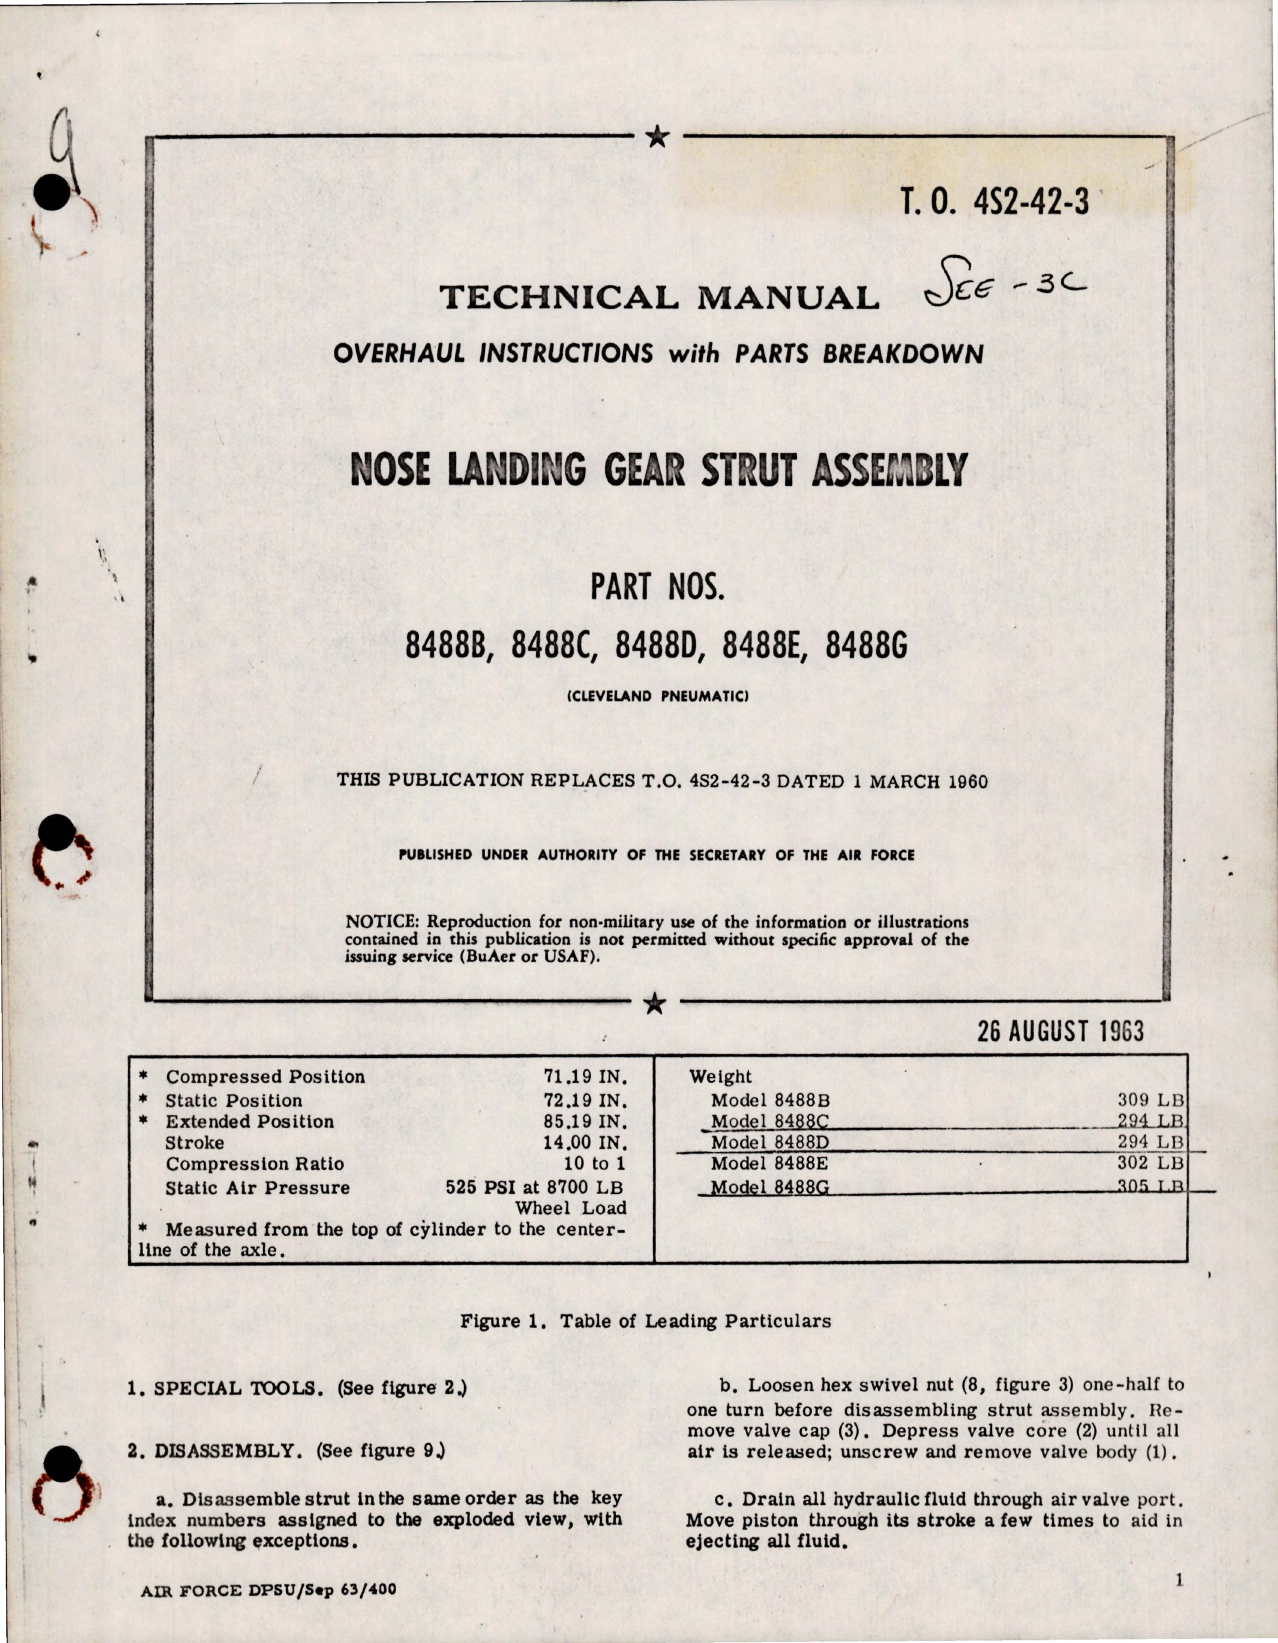 Sample page 1 from AirCorps Library document: Overhaul Instructions with Parts Breakdown for Nose Landing Gear Strut Assembly - Parts 8488B, 8488C, 8488D, 8488E, 8488G